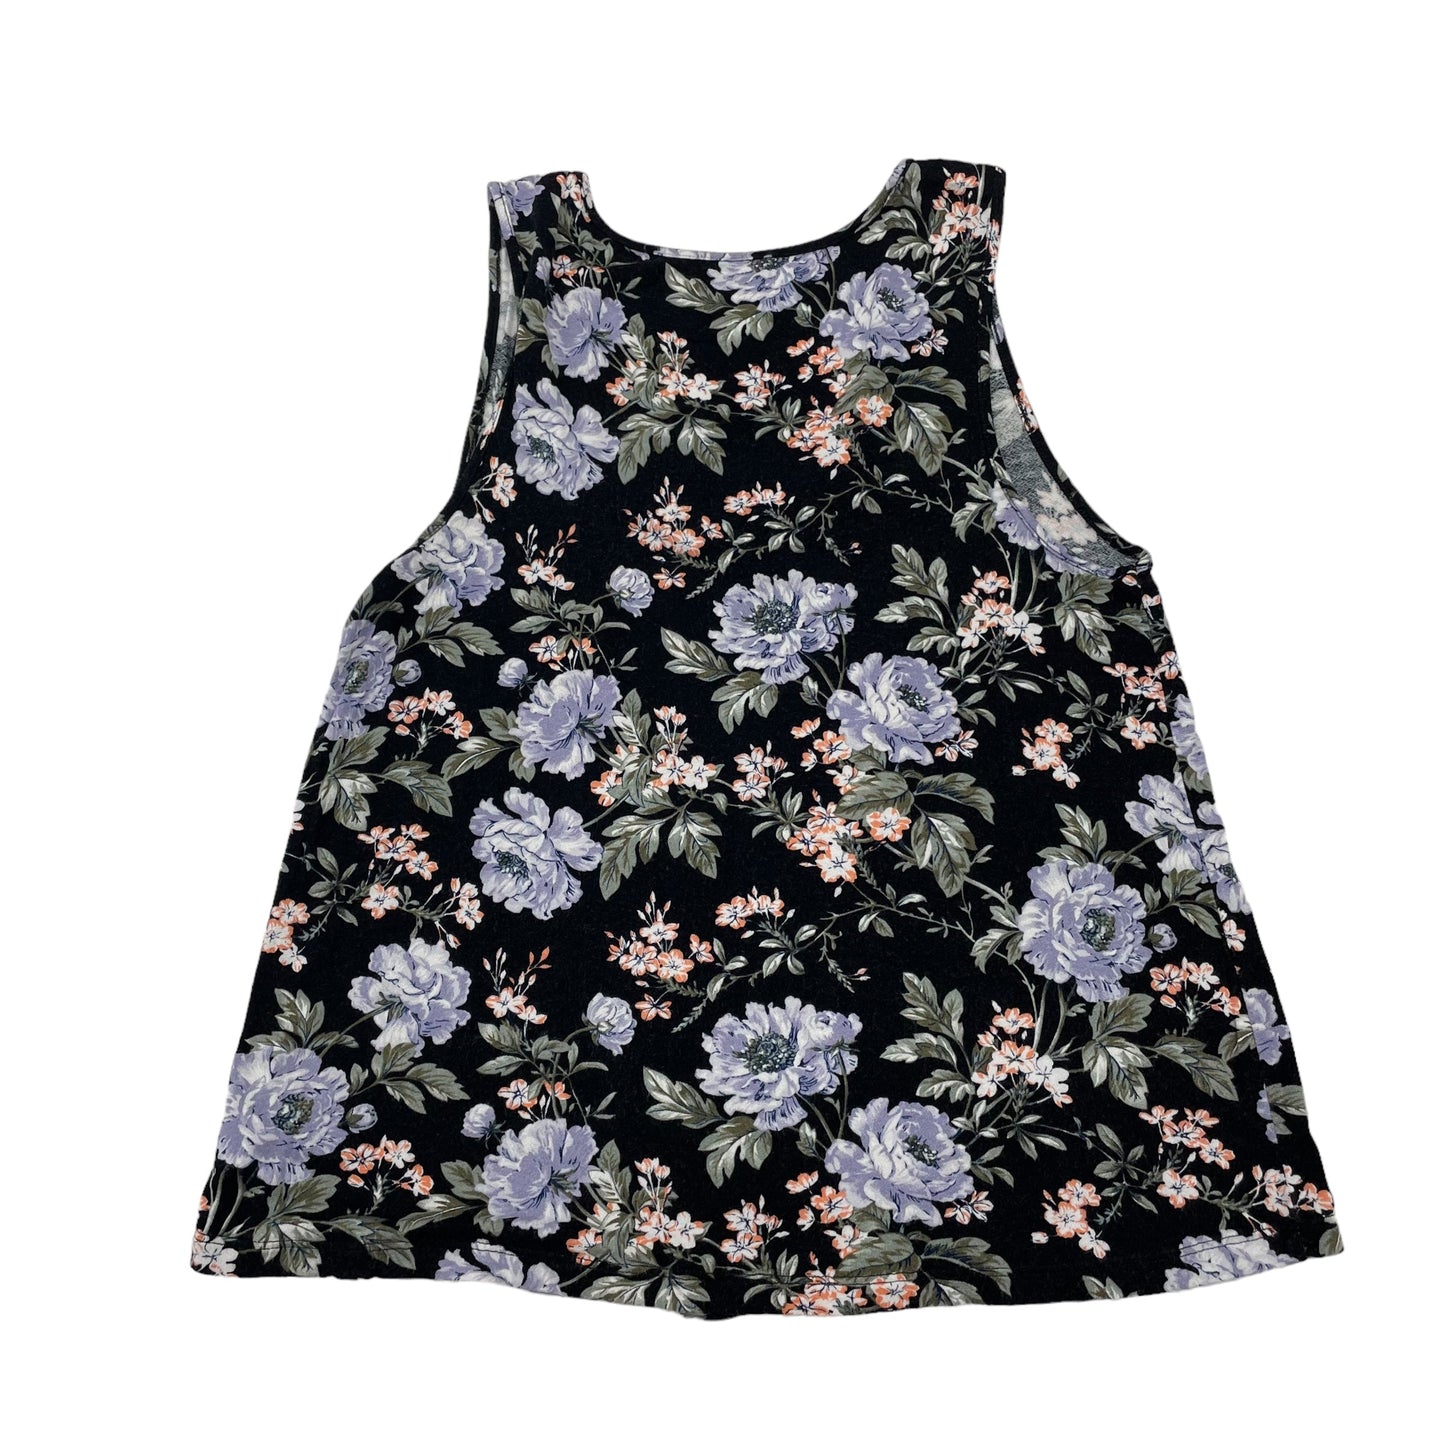 FLORAL PRINT AMERICAN EAGLE TOP SLEEVELESS, Size S